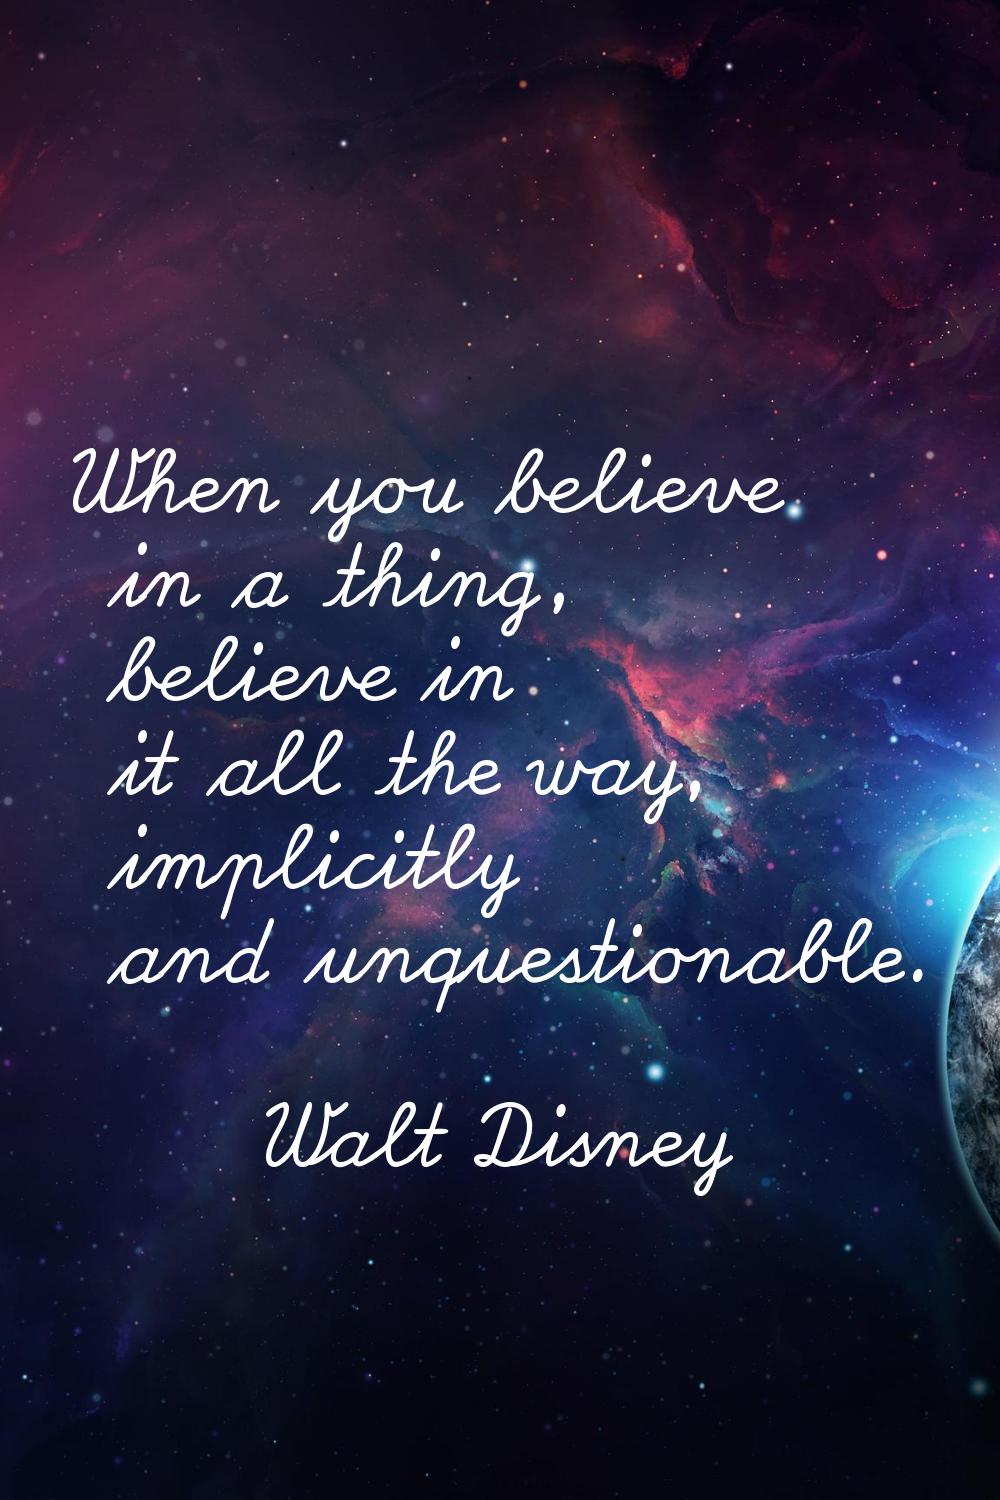 When you believe in a thing, believe in it all the way, implicitly and unquestionable.